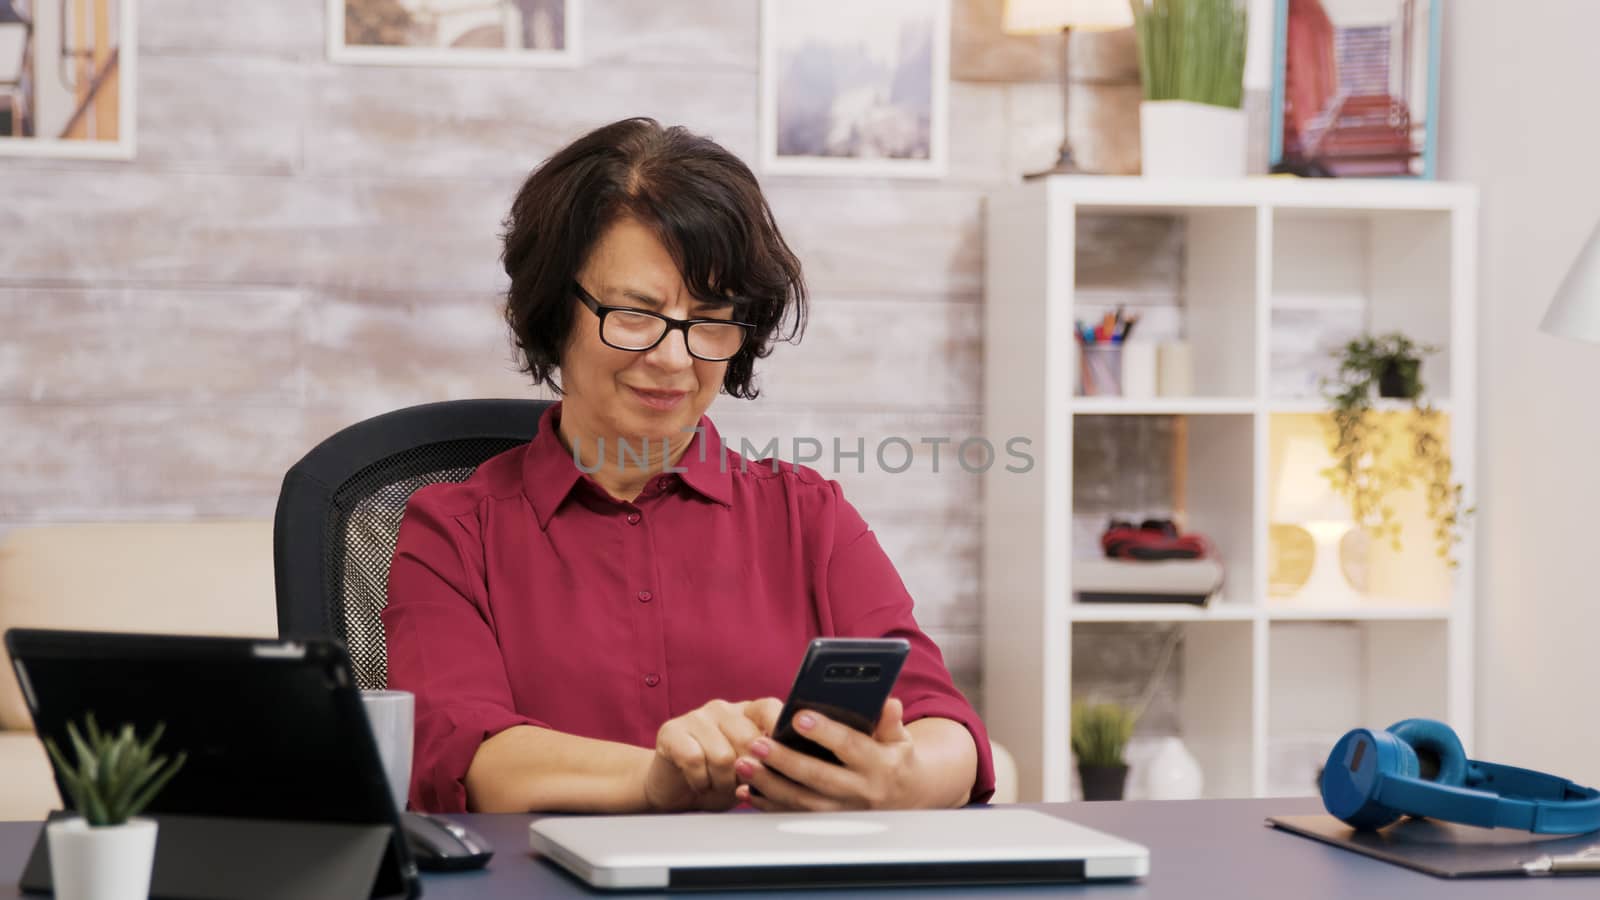 Elderly woman with glasses using tablet and phone by DCStudio